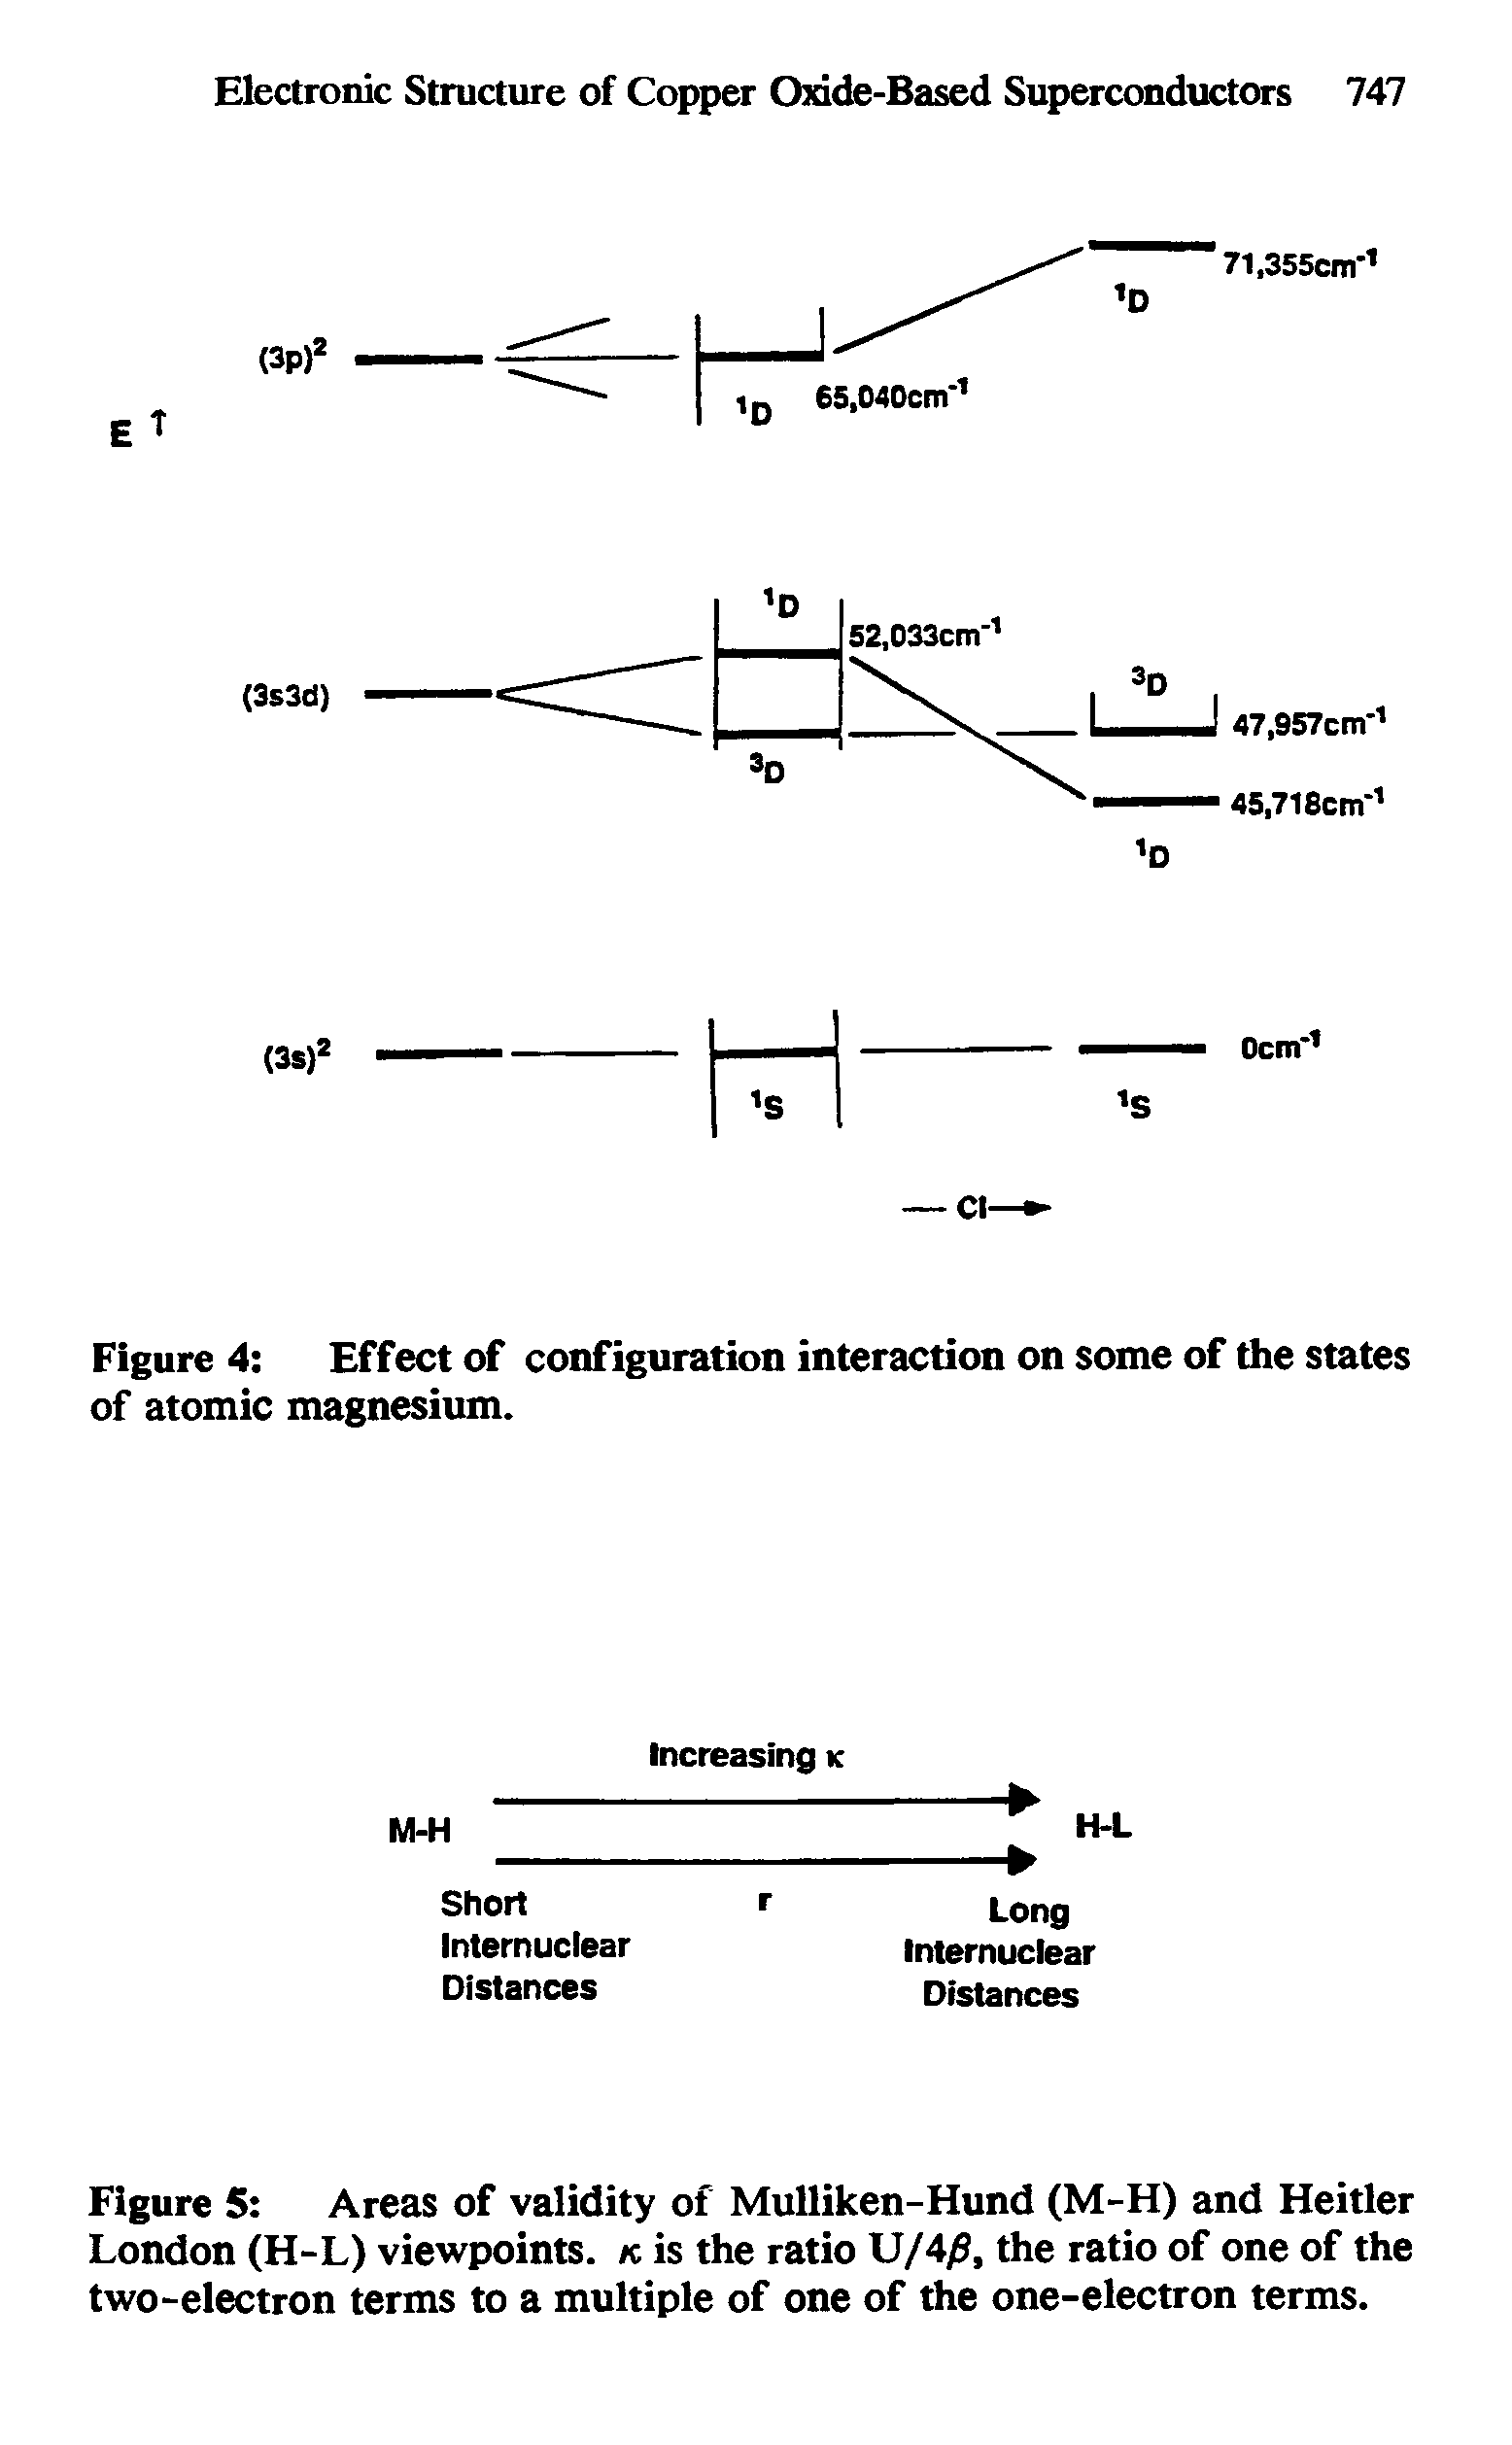 Figure 4 Effect of configuration interaction on some of the states of atomic magnesium.